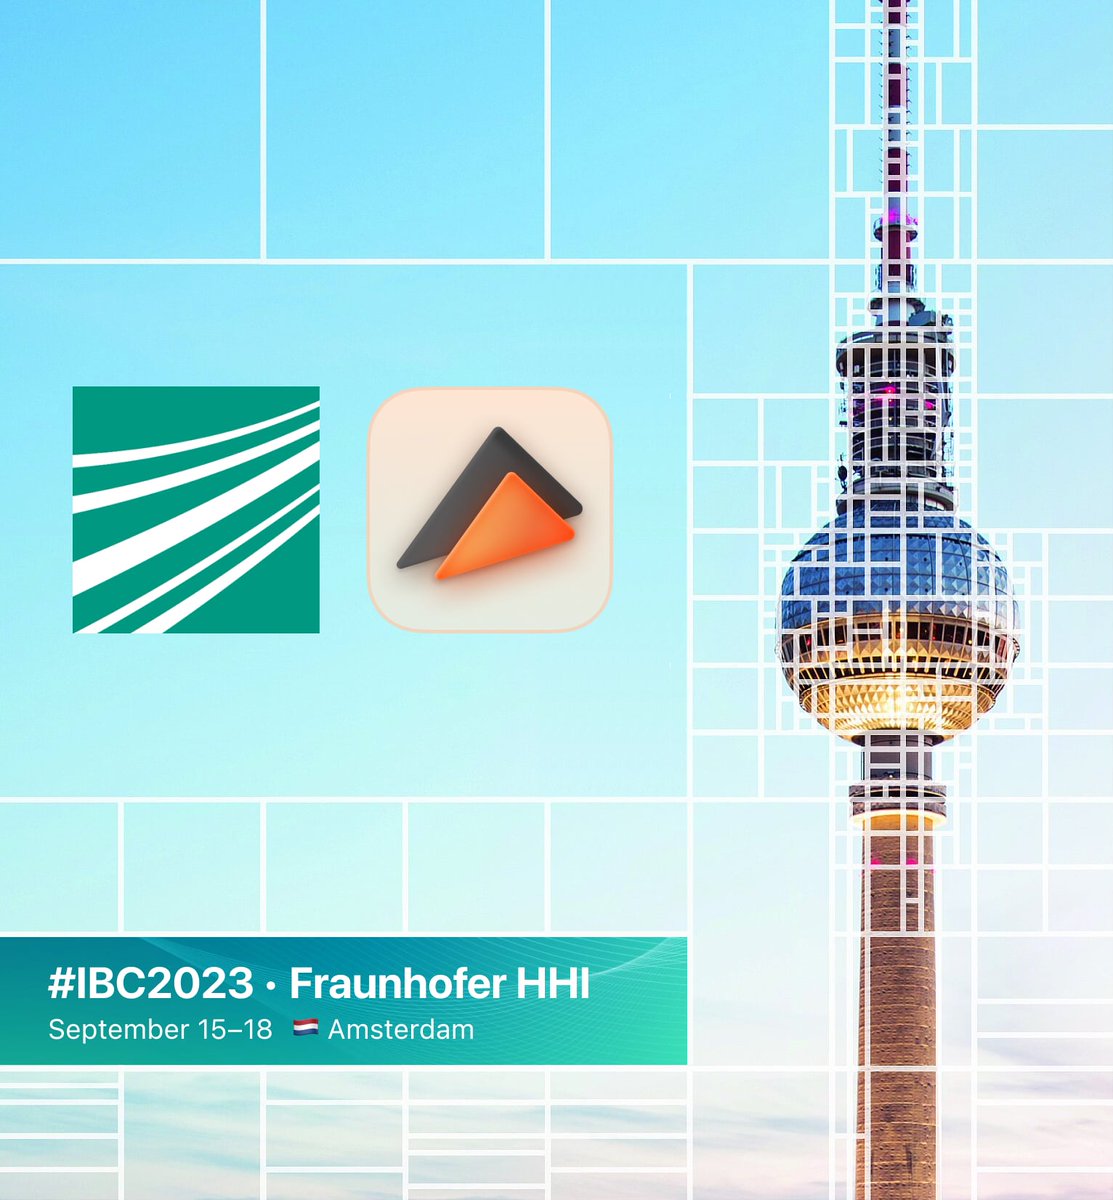 Elmedia Player was featured at the #IBC2023 event, thanks to the brilliant minds at @FraunhoferHHI! 

Our player was chosen as the platform to demonstrate the groundbreaking H.266/VVC codec. We couldn't be happier about this collaboration and the chance to shine at the @IBCShow!